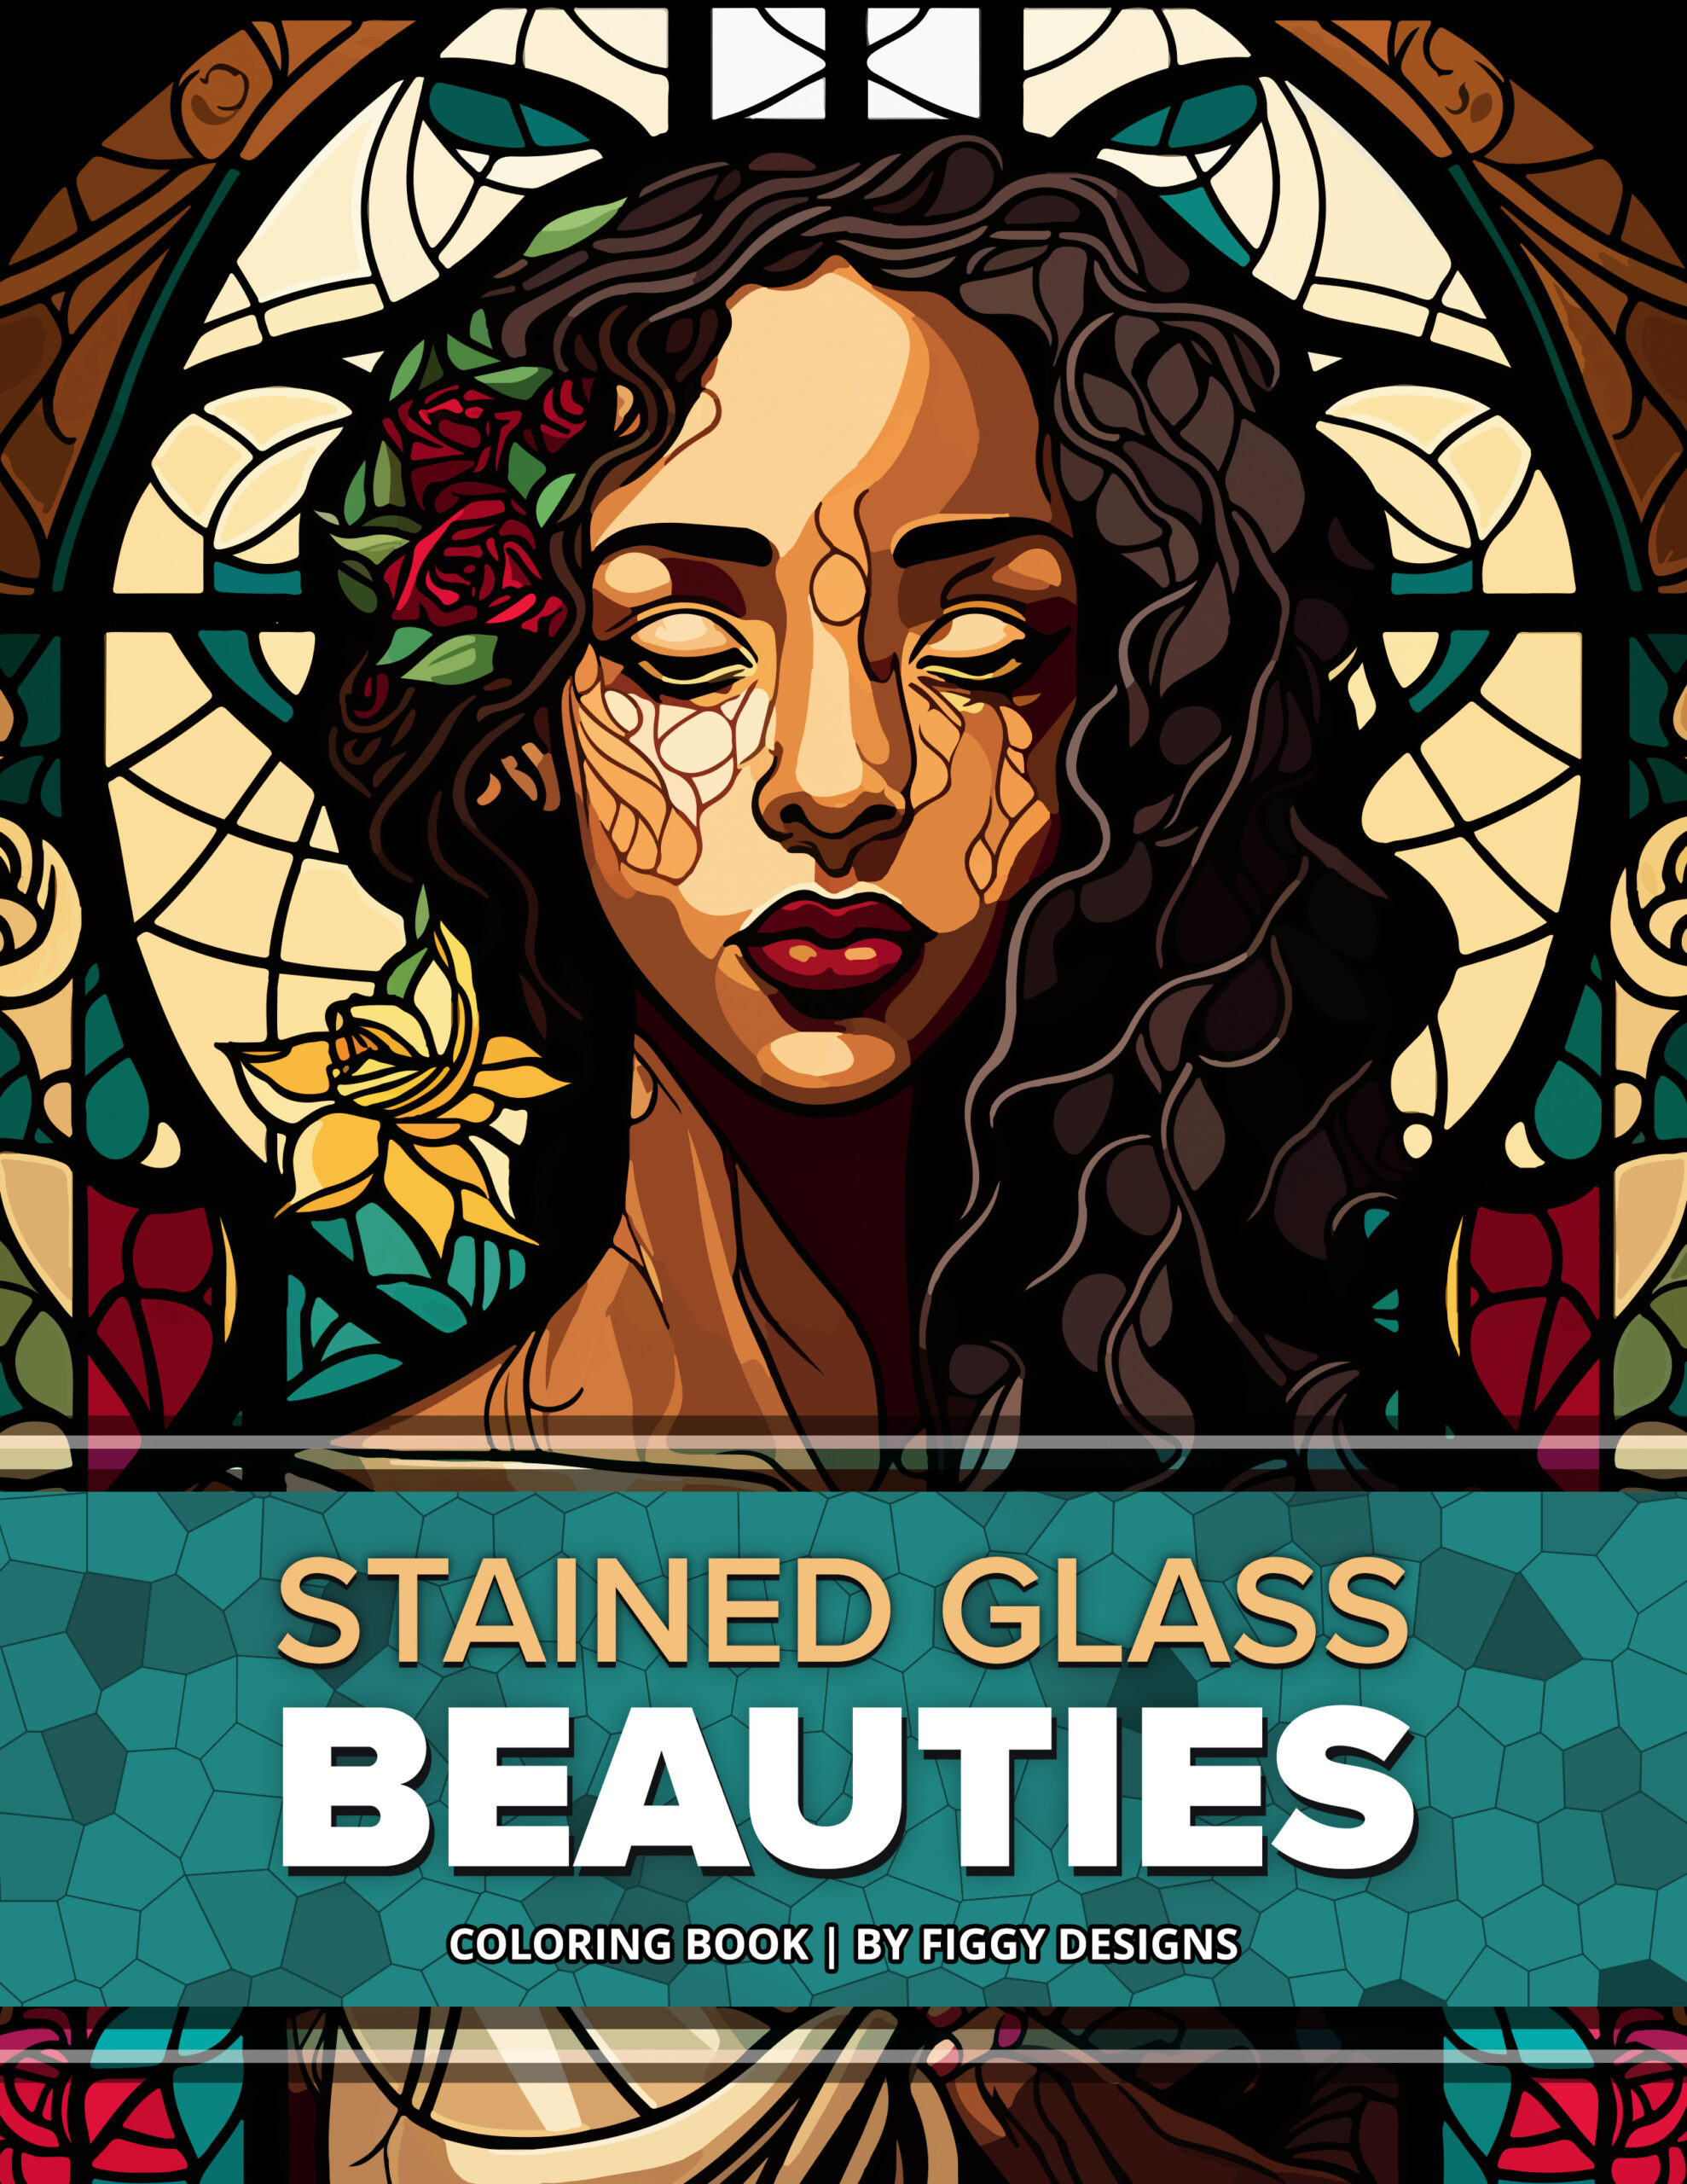 Stained Glass Beauties Coloring Book